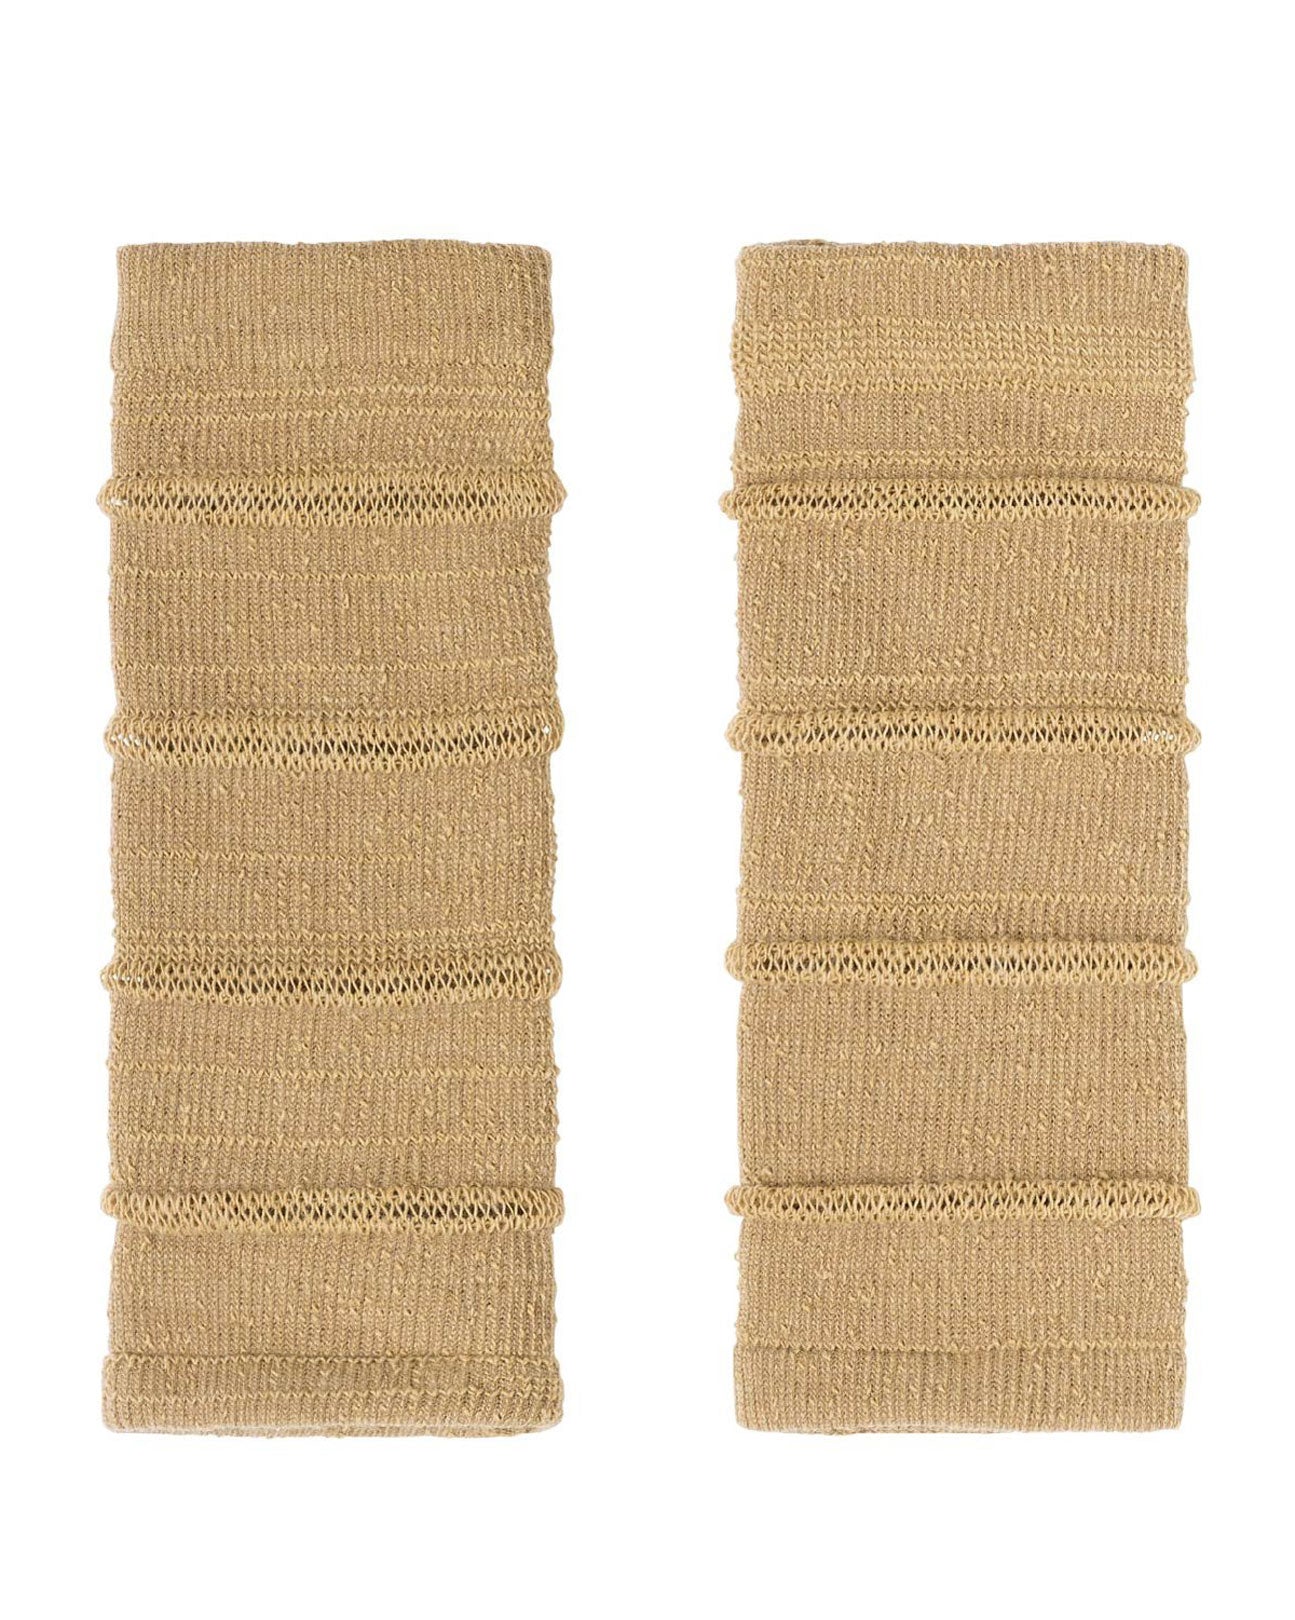 ELLS Arm Warmers in Camel available at Lahn.shop